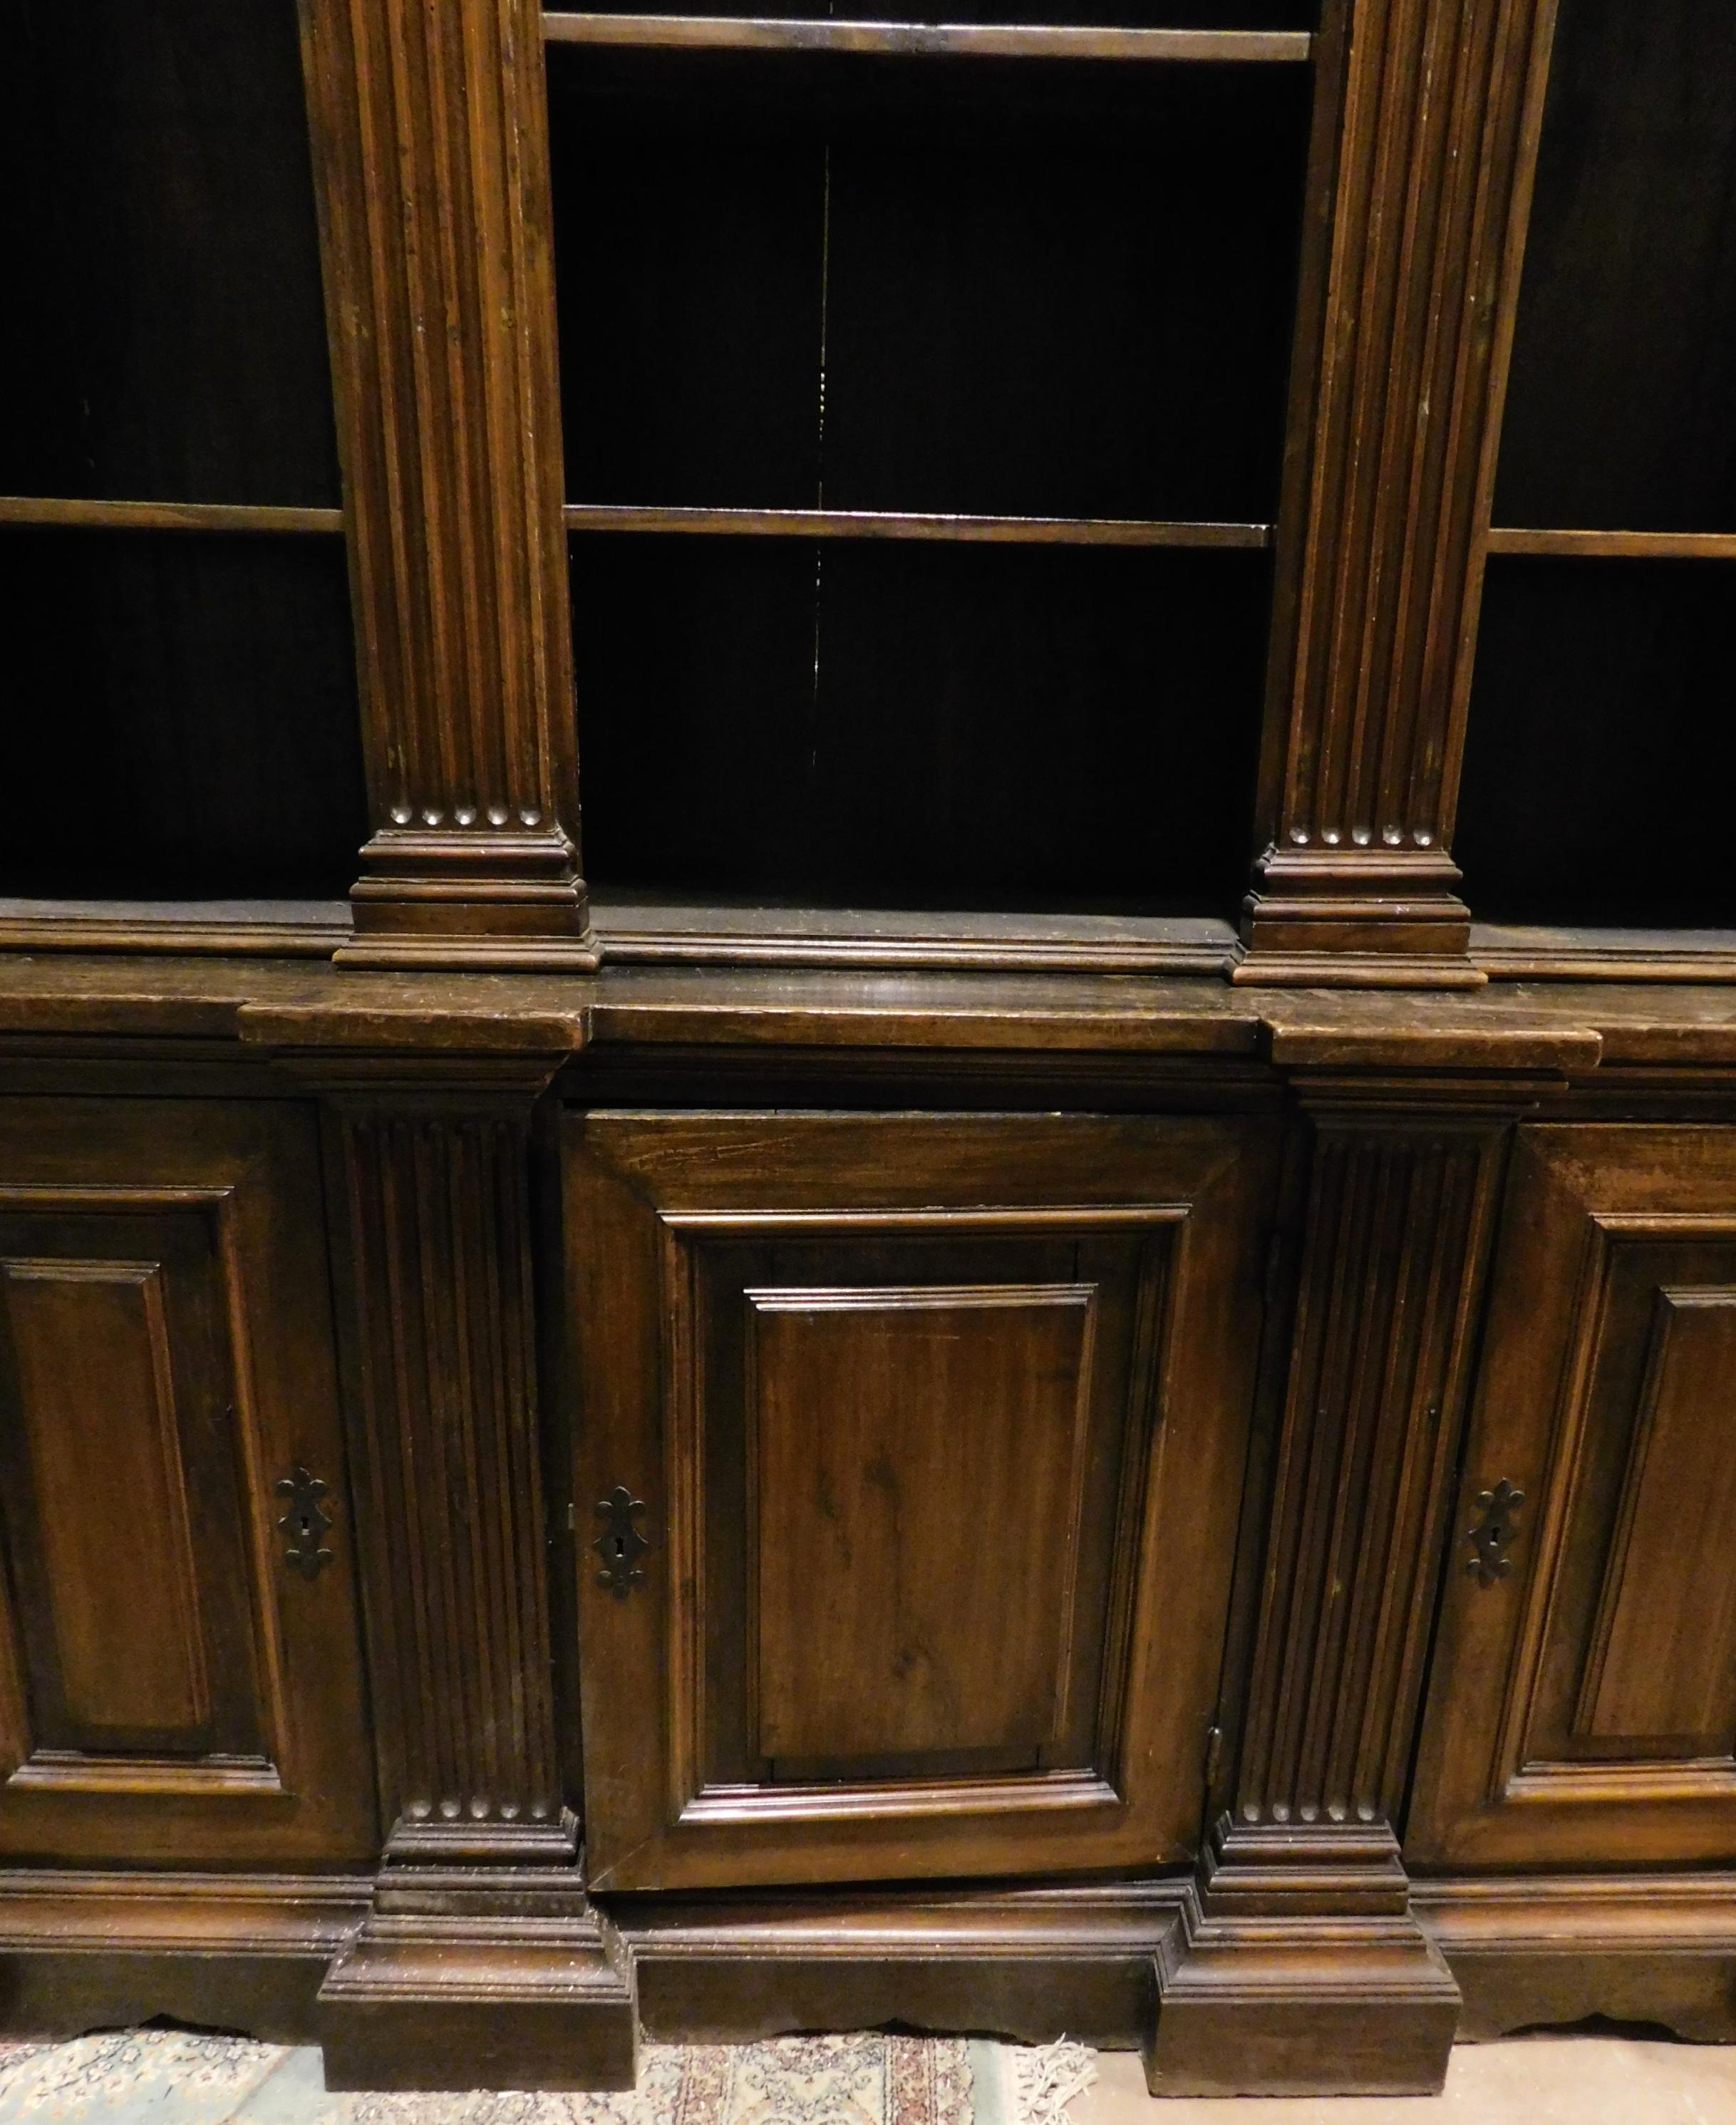 Hand-Carved Antique Walnut Bookcases, 19th Century Italy